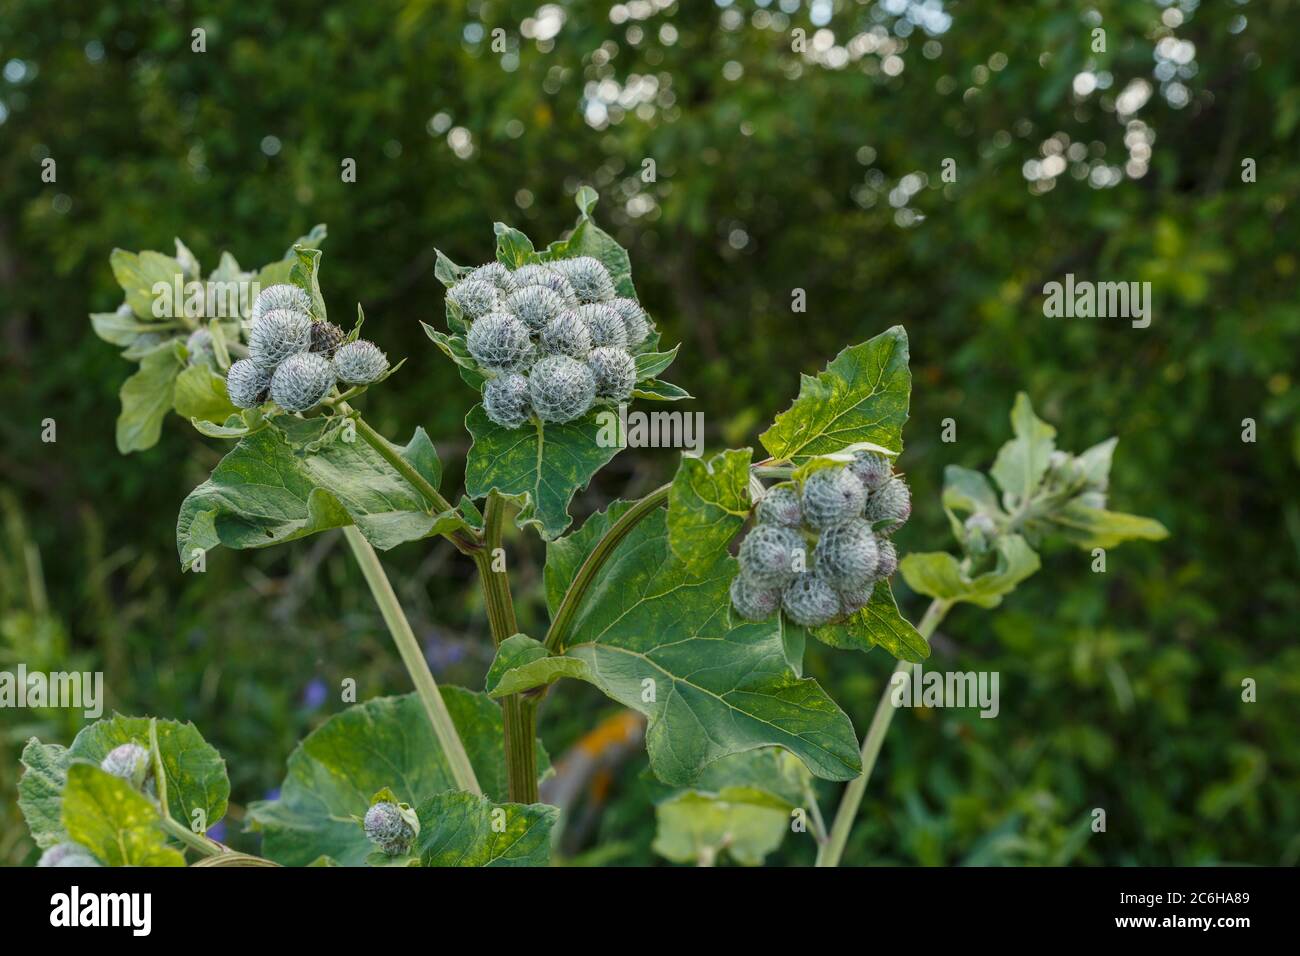 Arctium lappa, commonly called greater burdock. Blooming medicinal plant burdock. Stock Photo